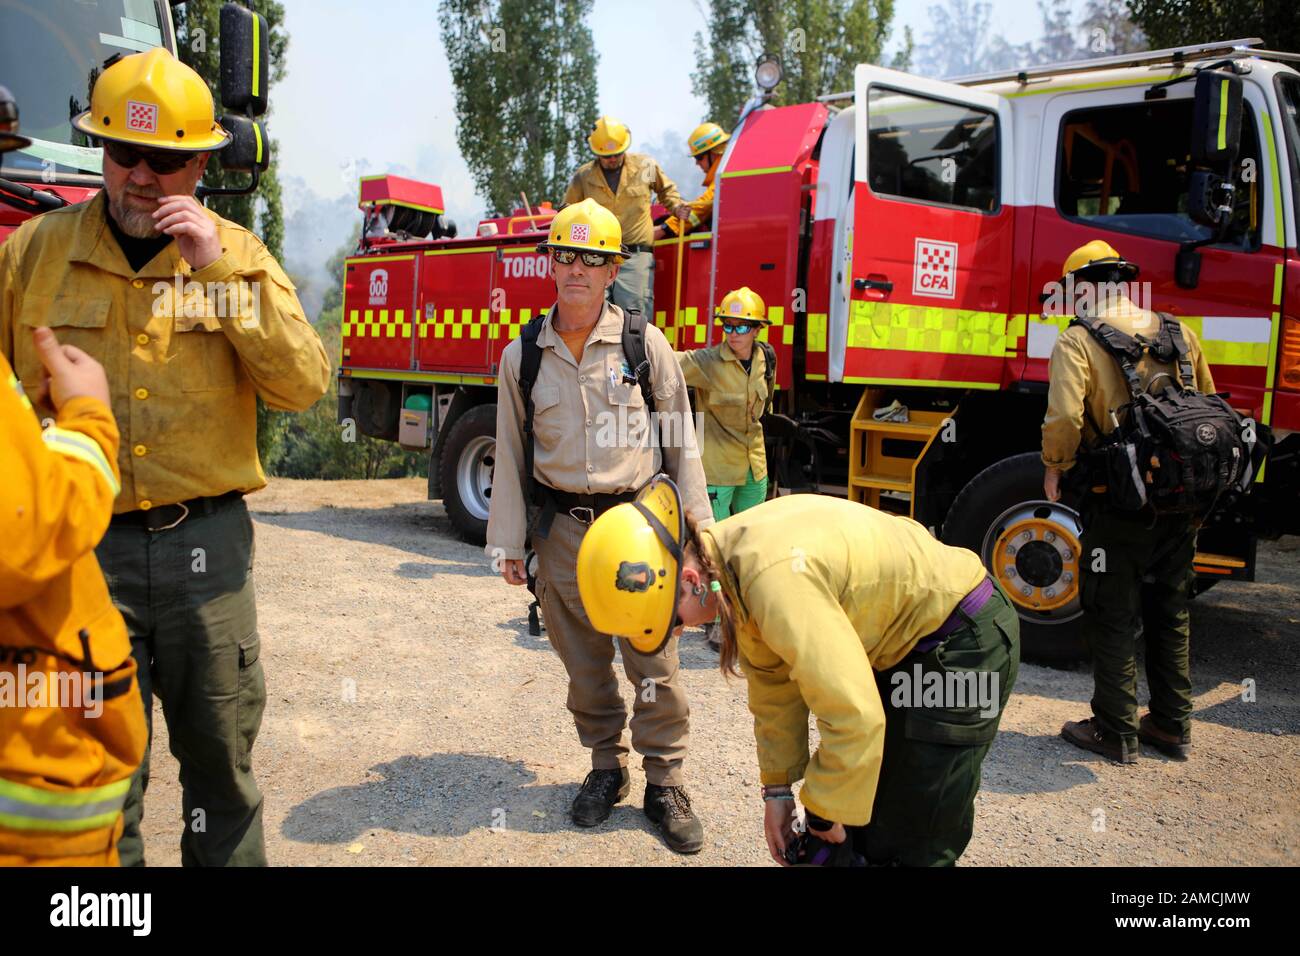 Victoria, Australia. 12th Jan, 2020. Firefighters from a joint Australian and U.S. strike team have a briefing as they work bring bushfire under control to protect nearby structures, in